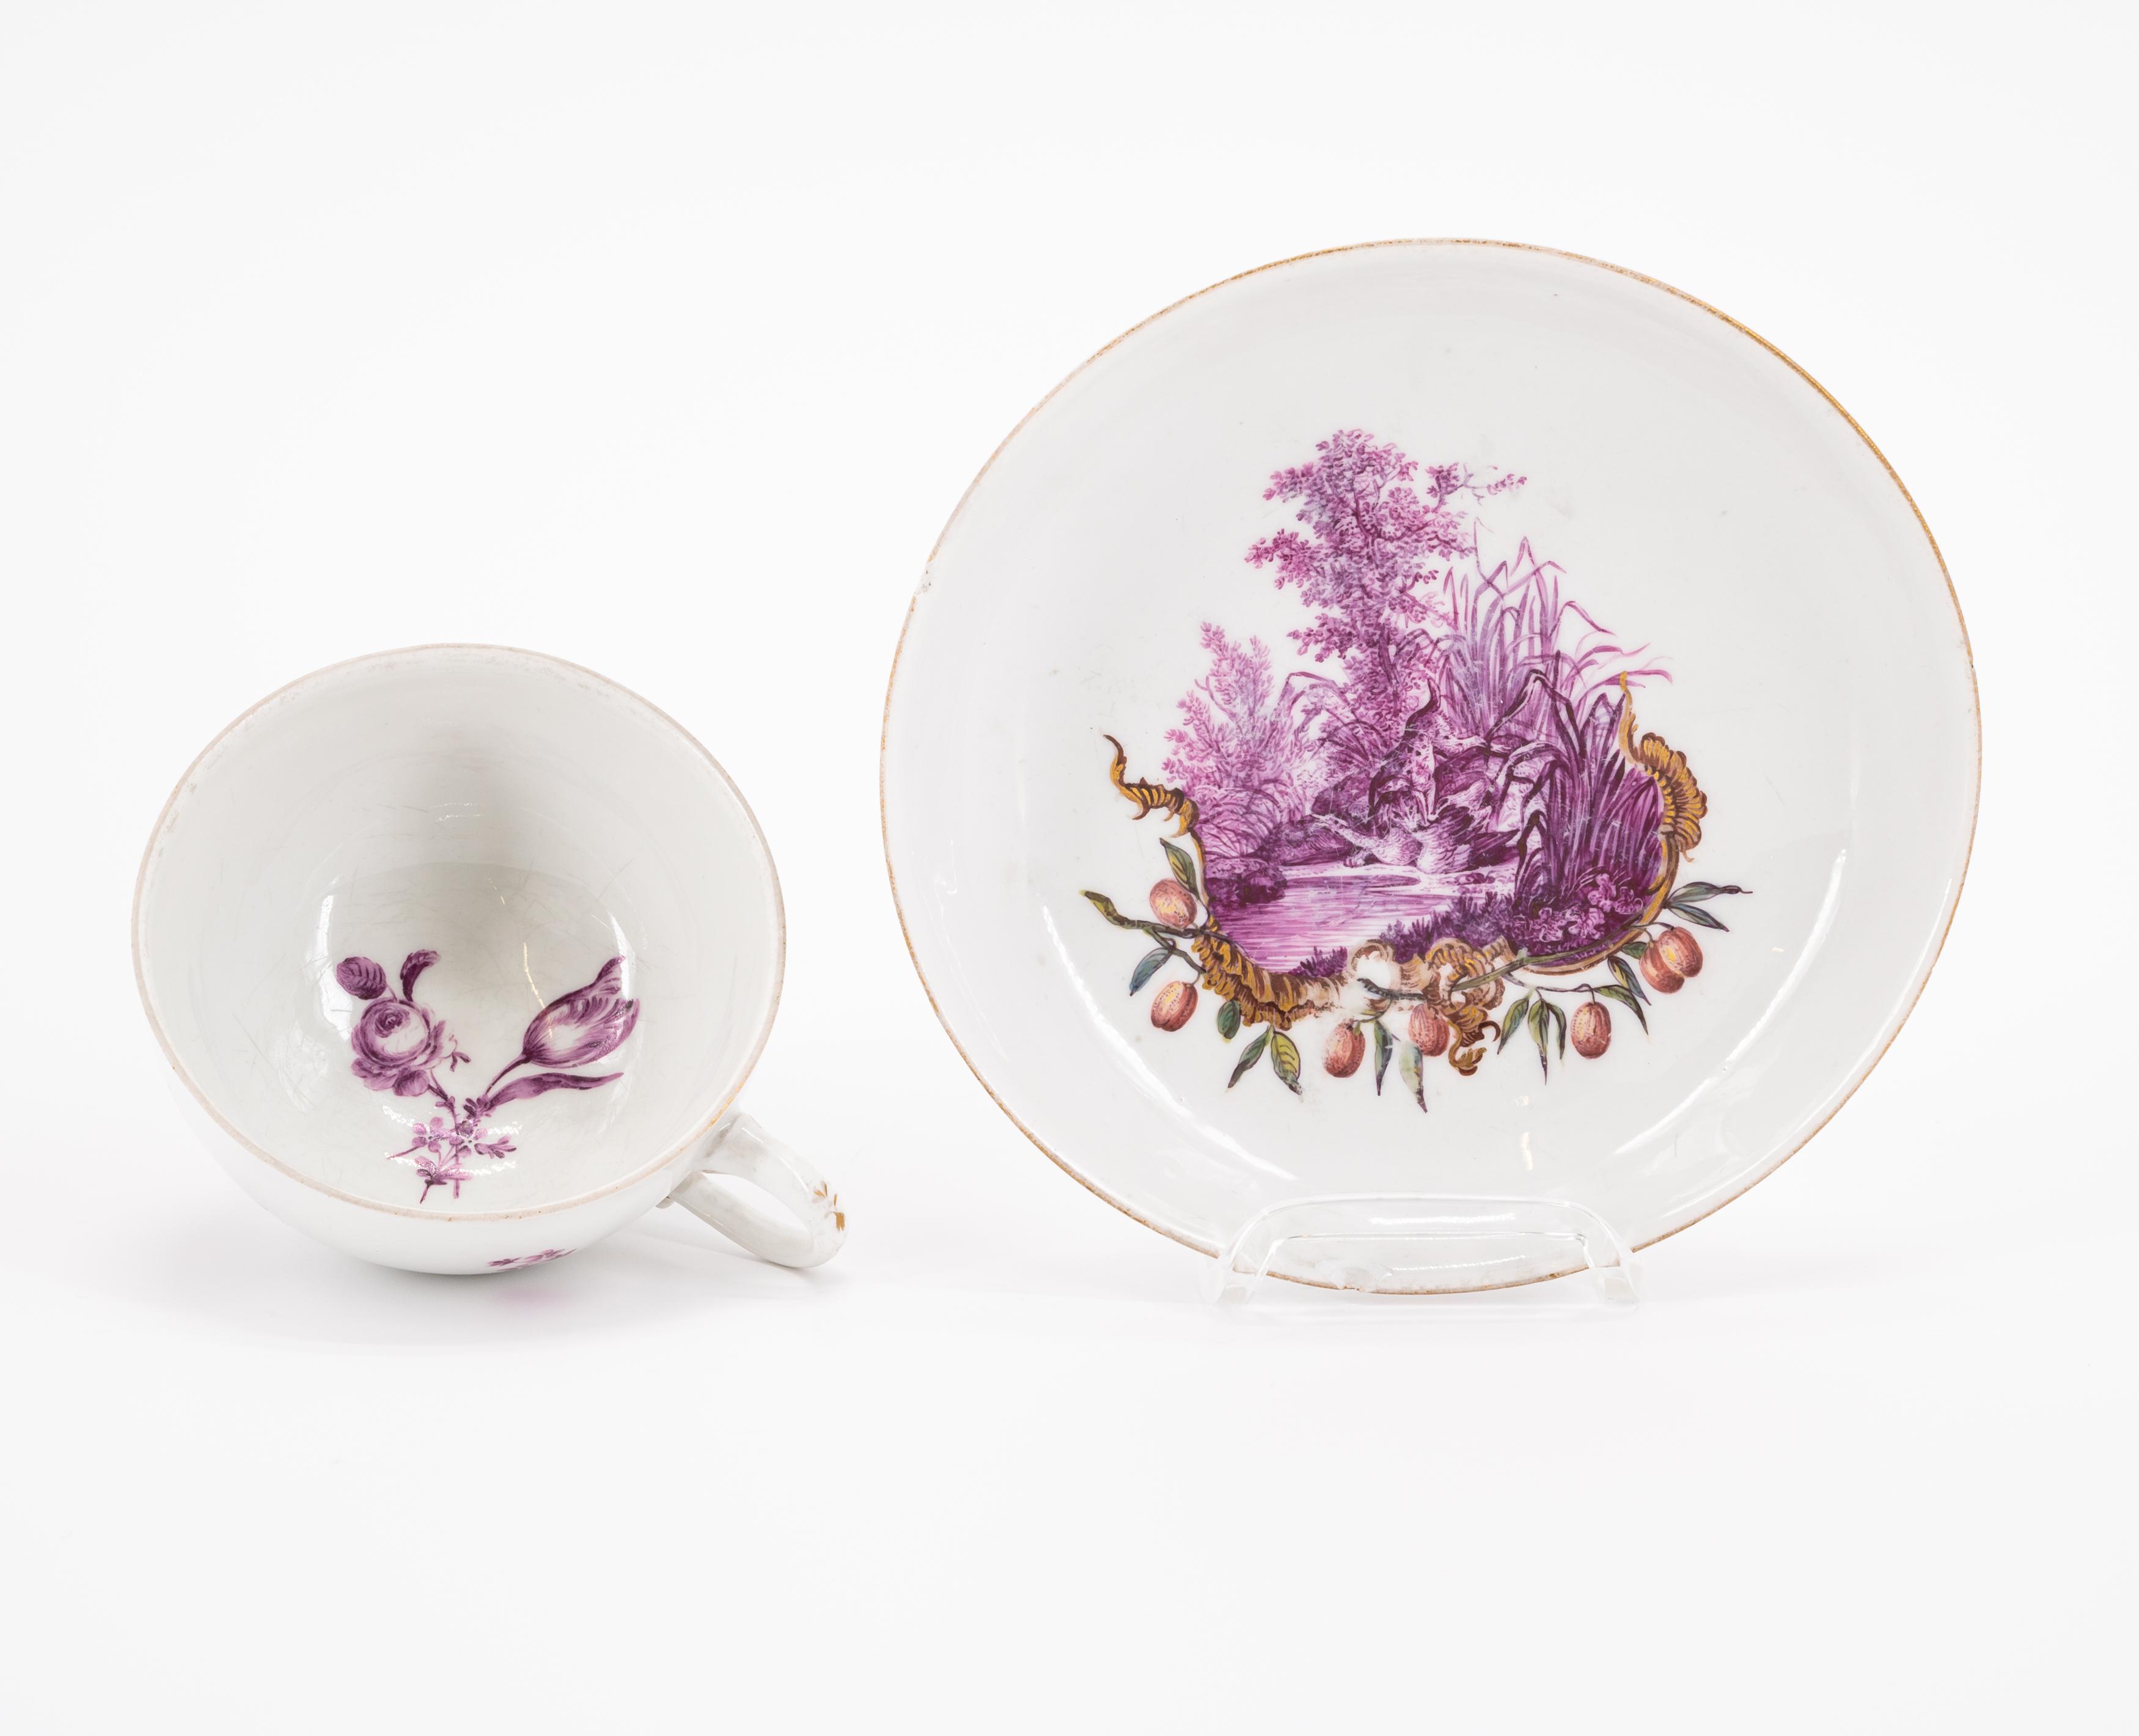 PORCELAIN CUP AND SAUCER WITH HUNTING SCENES IN PURPLE CAMAIEU - Image 5 of 6